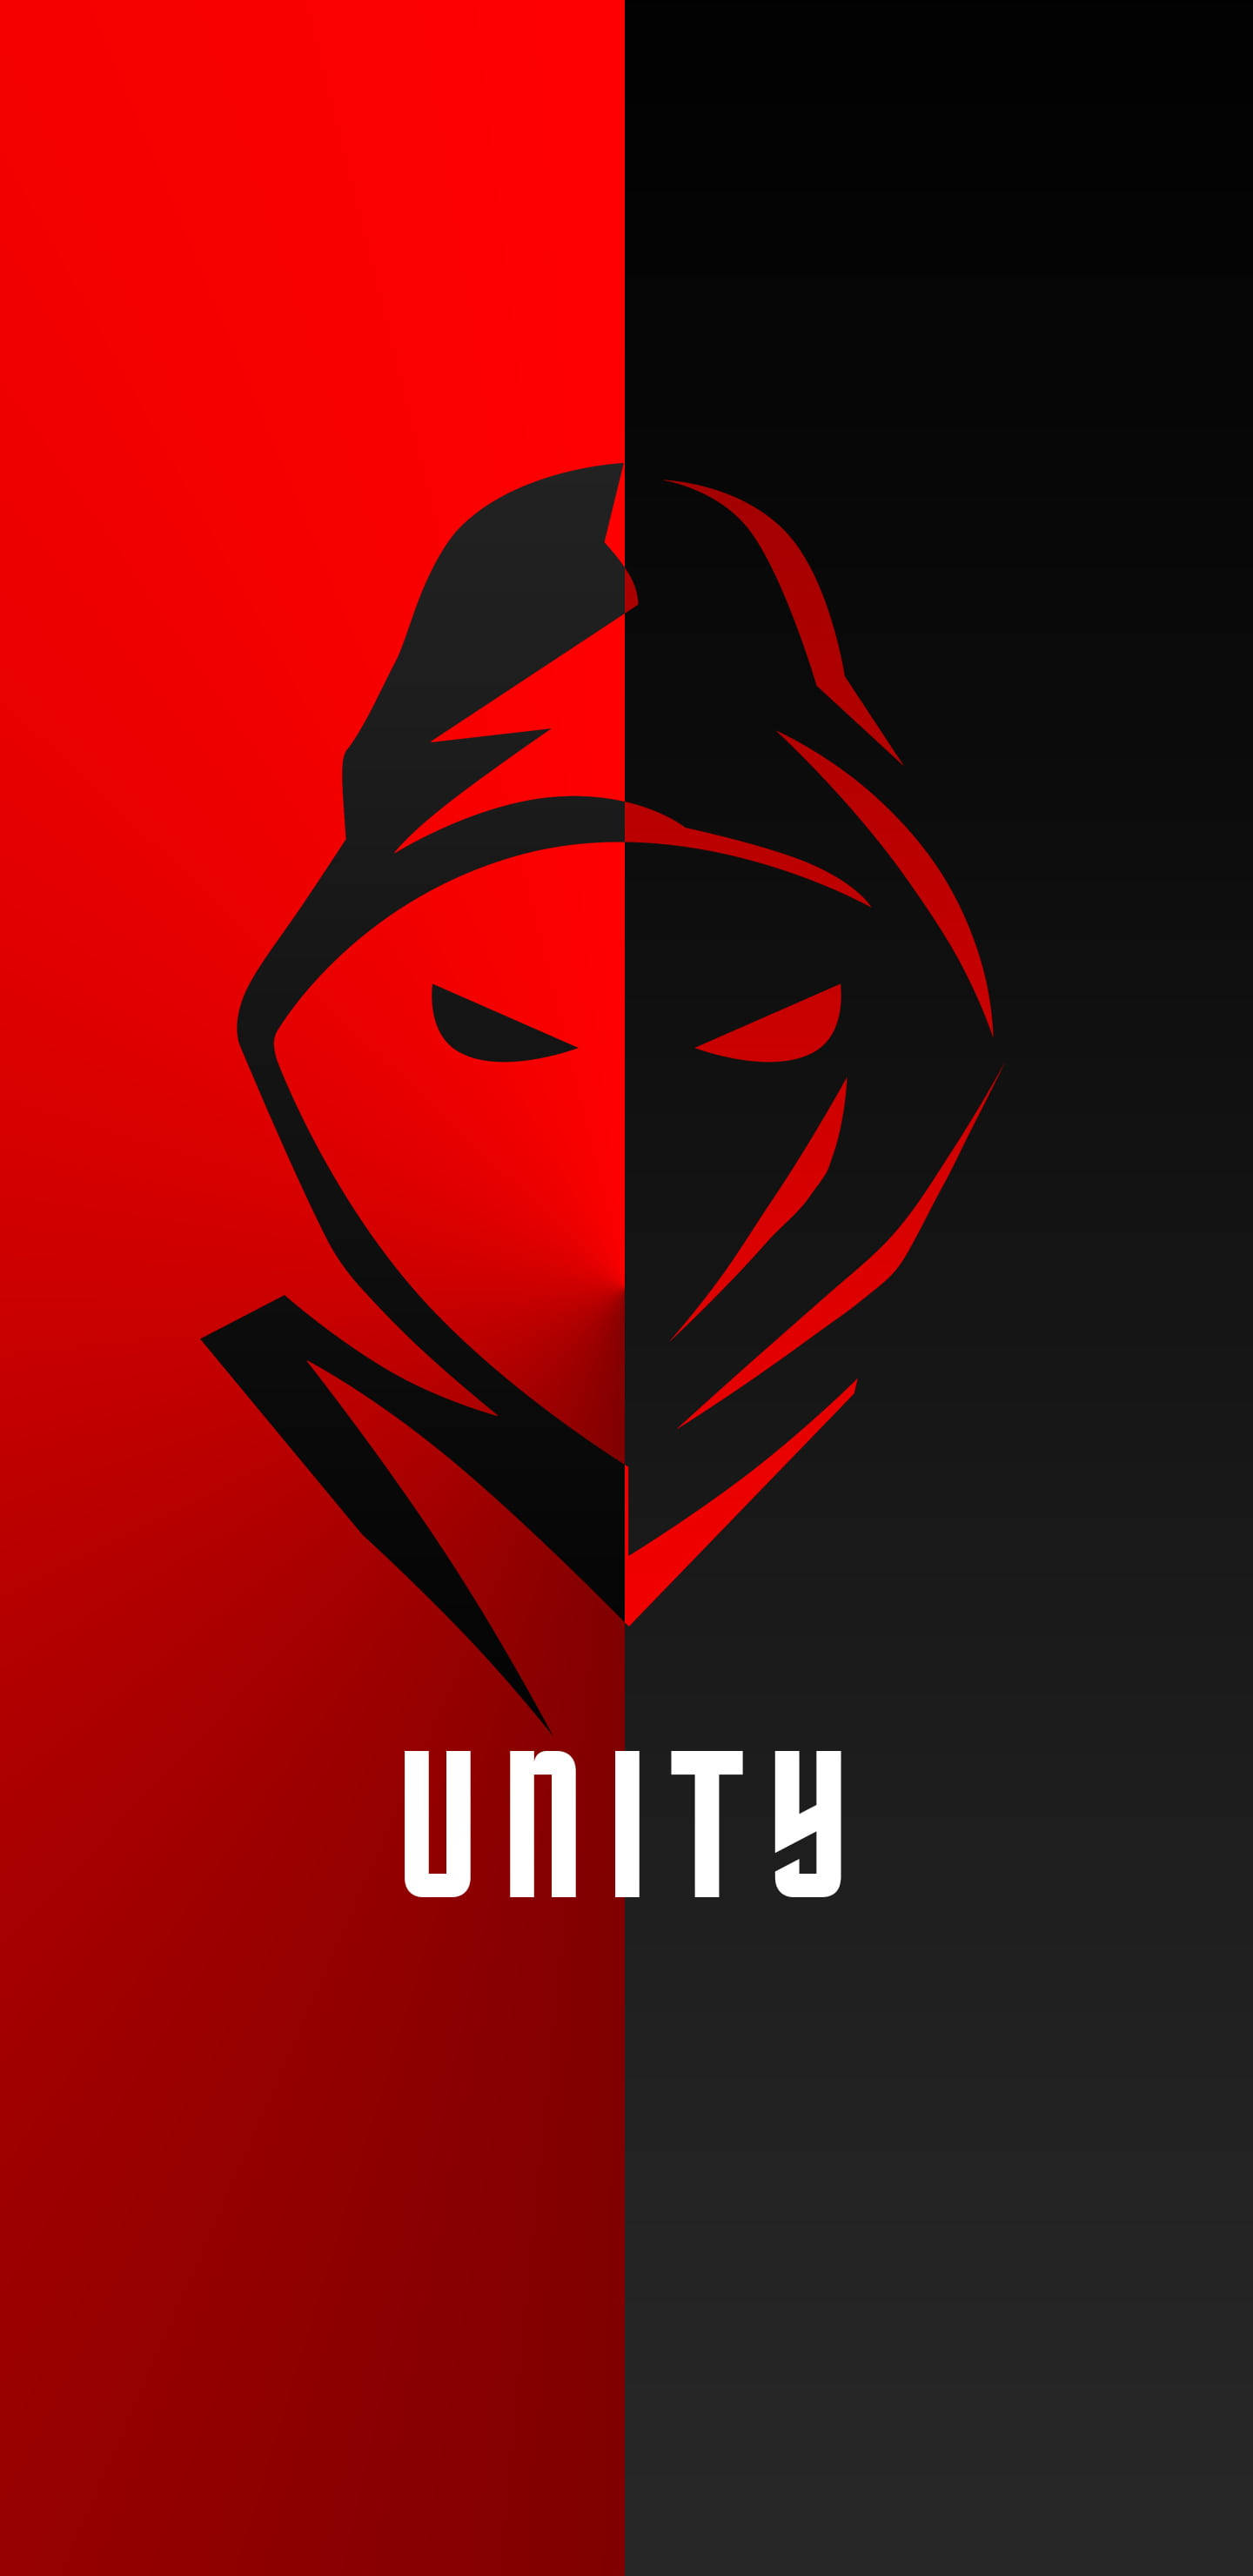 Download Unity Black And Red Gaming Wallpaper 